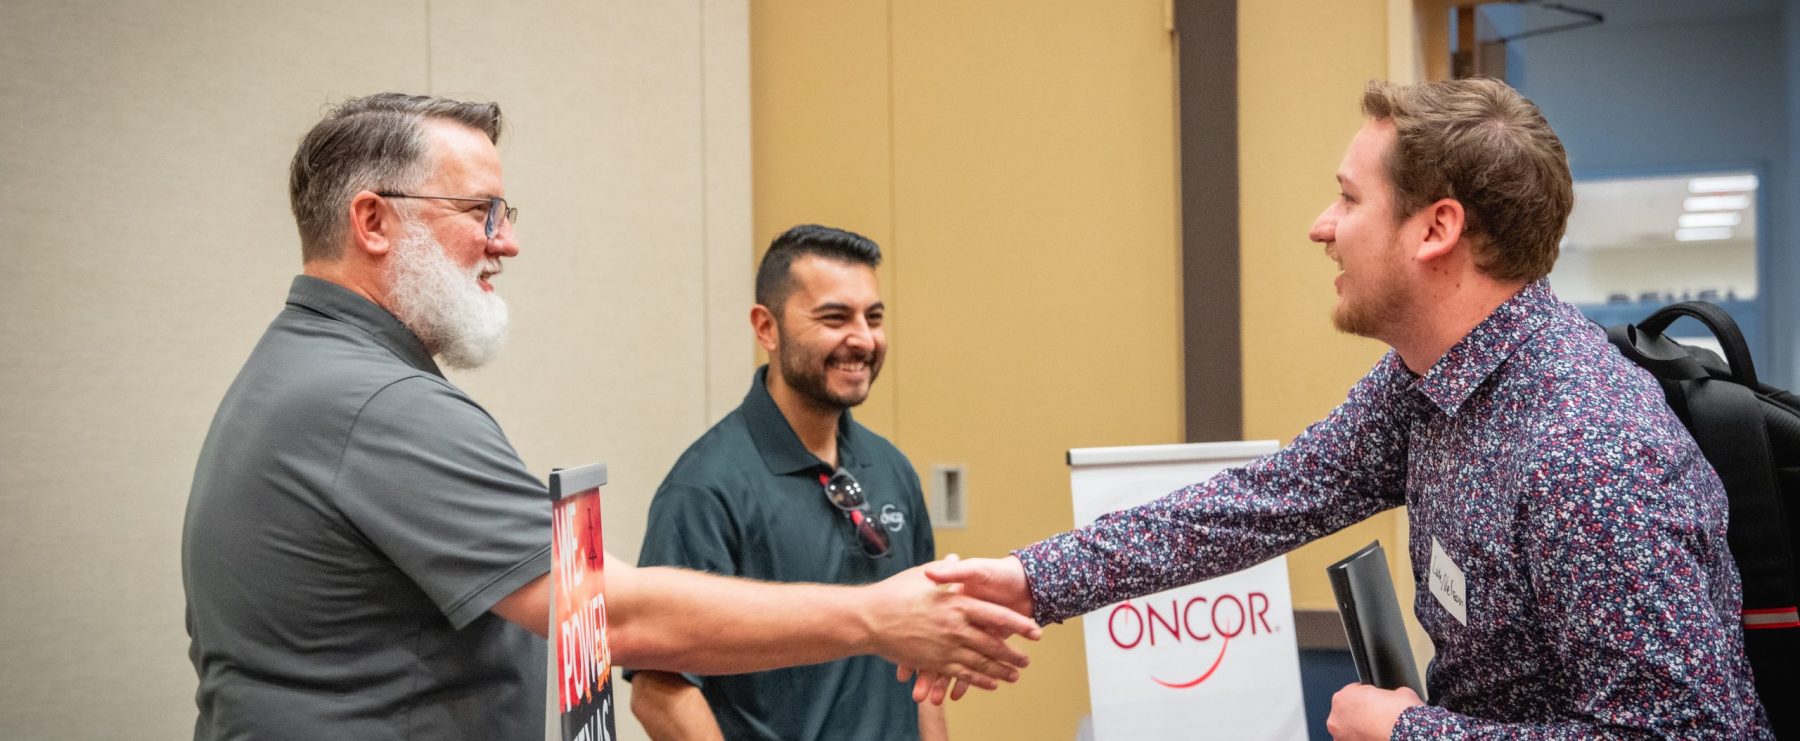 A student shakes hands with potential employers at a career fair.